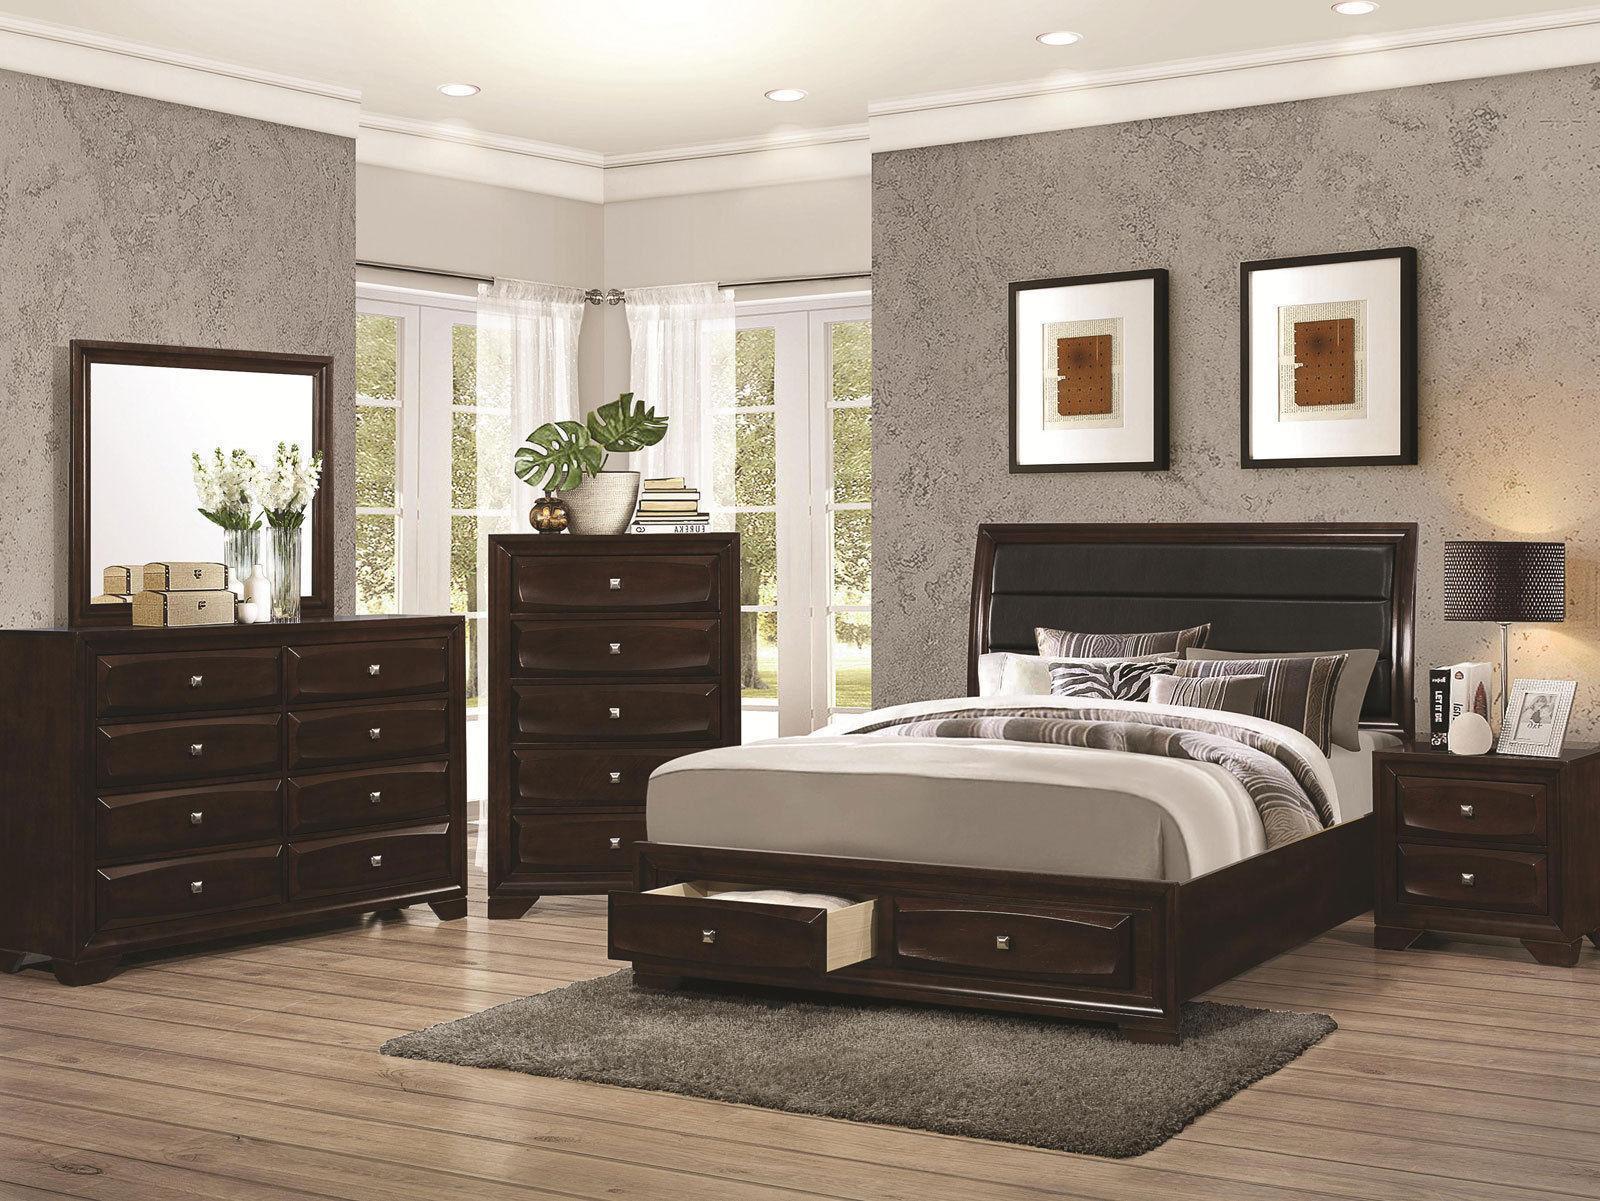 Brown Leather Bedroom Decore